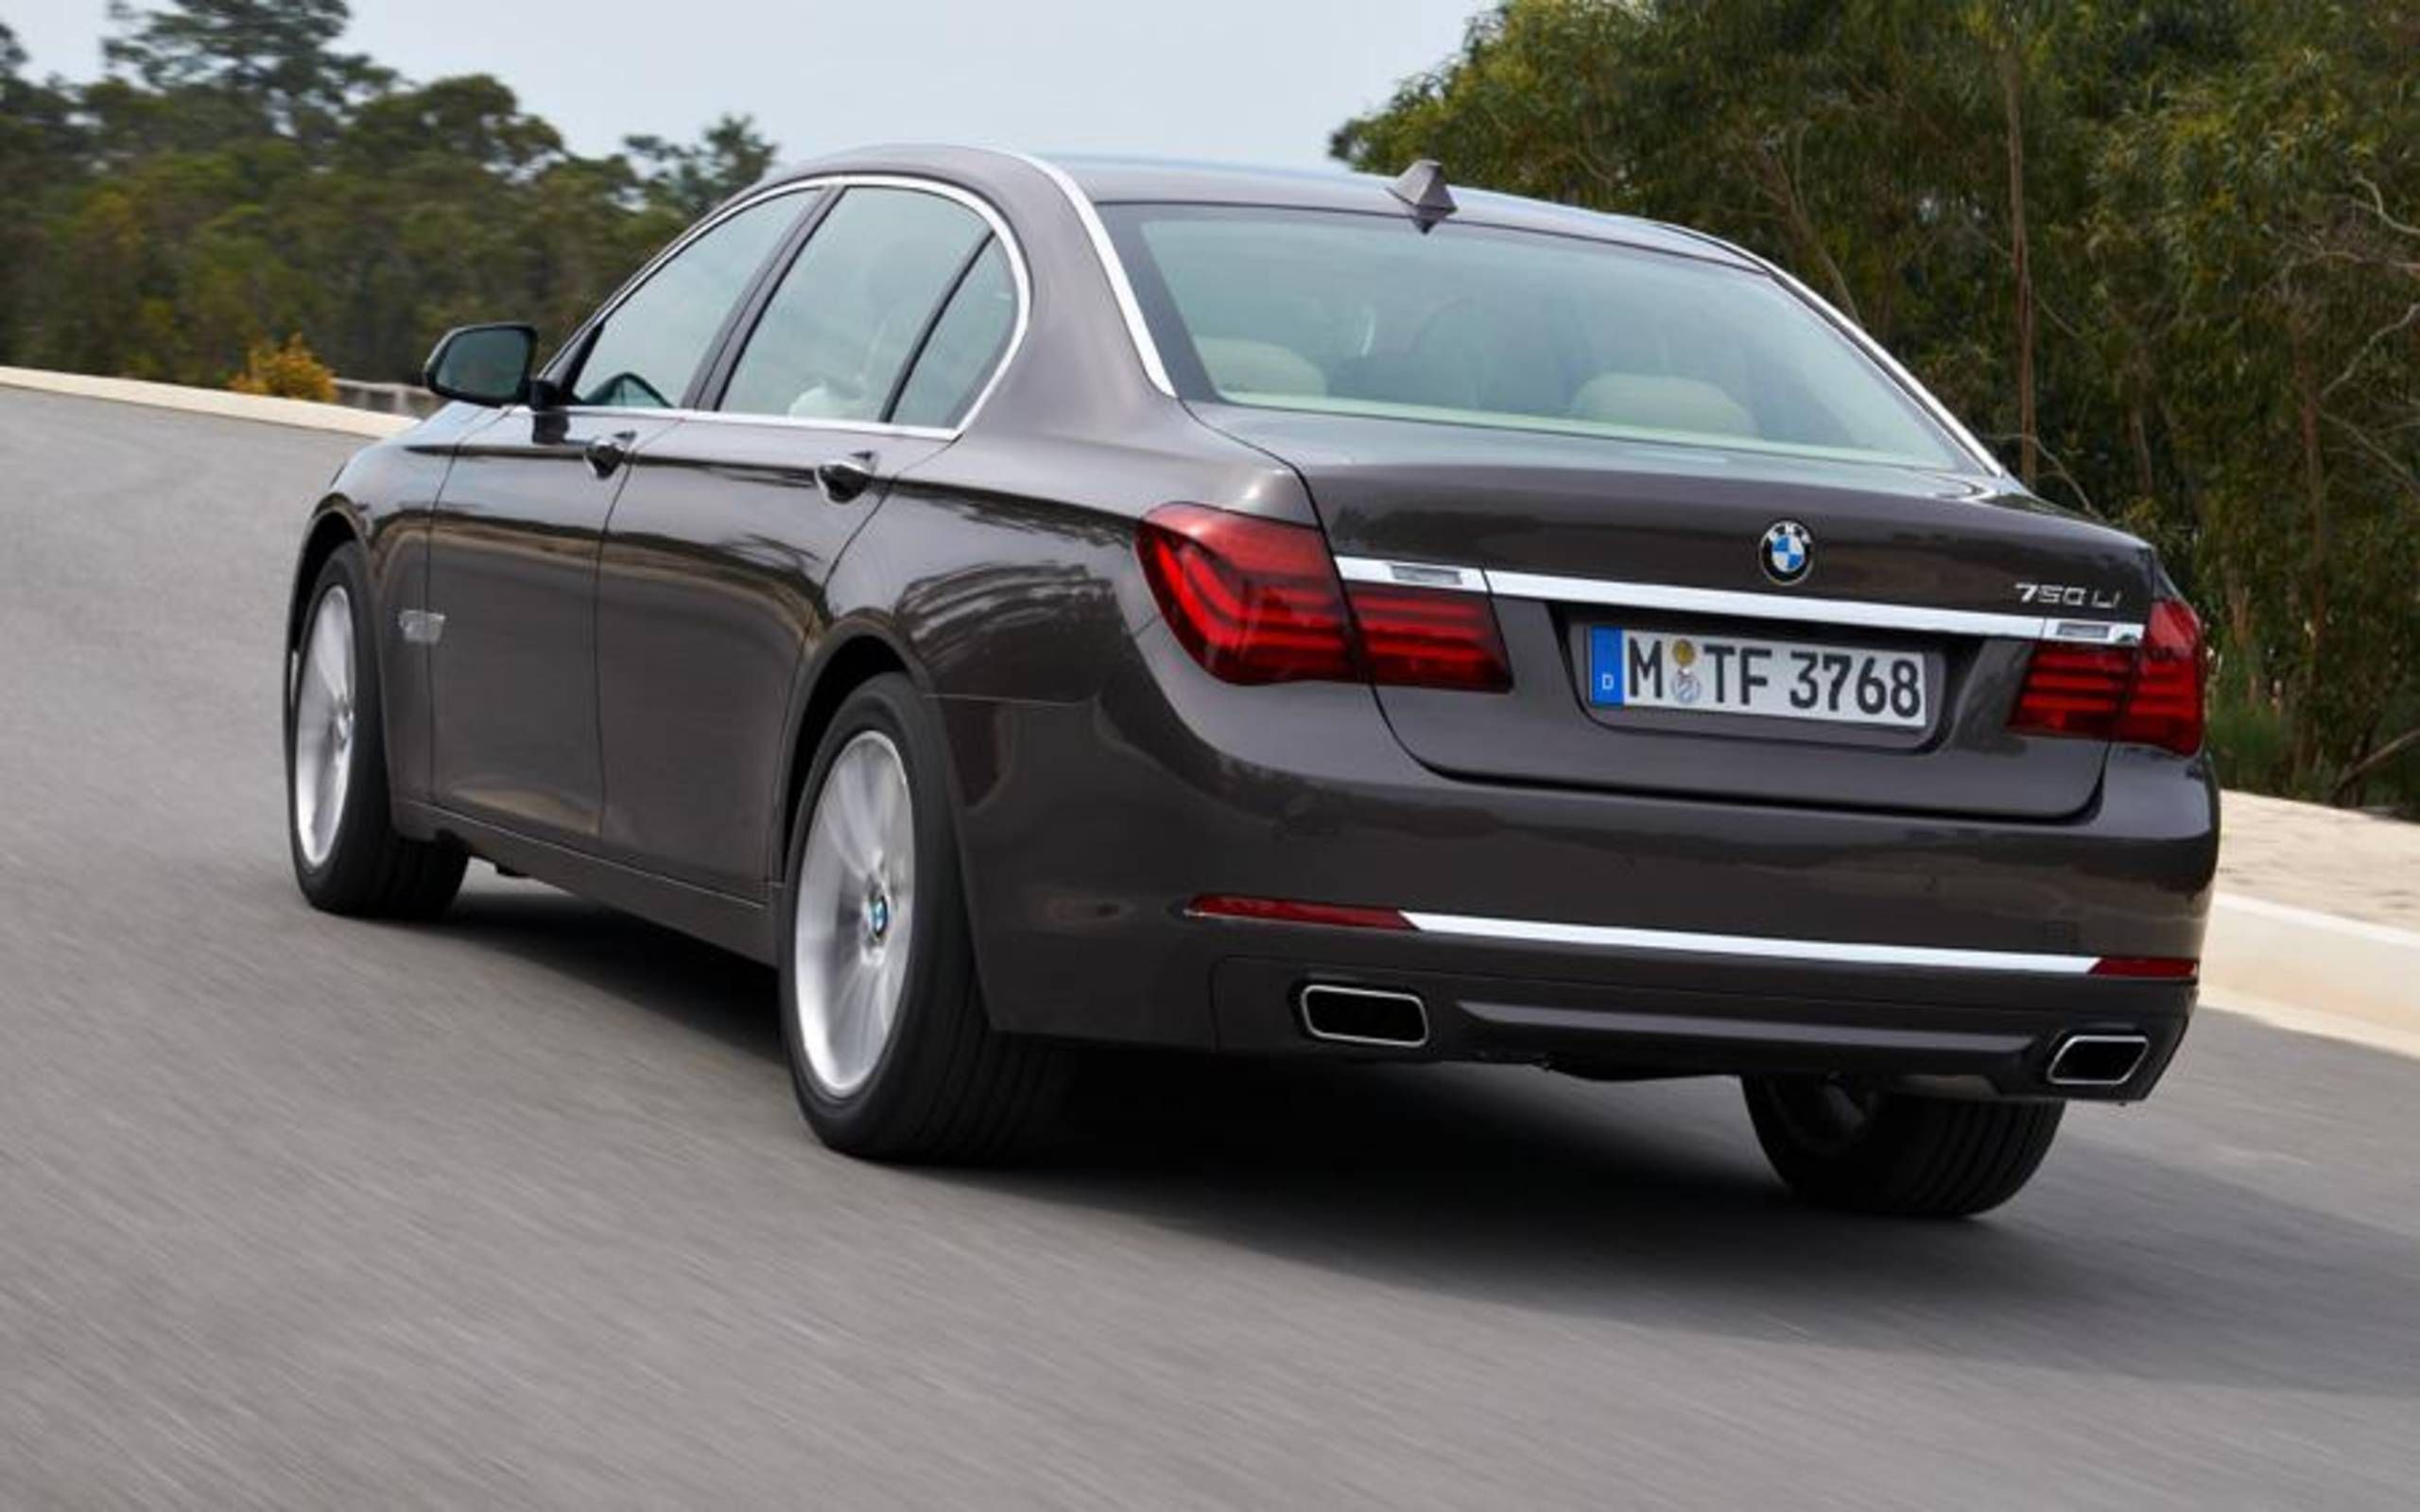 2013 BMW 7-series comes with more power, features, cost